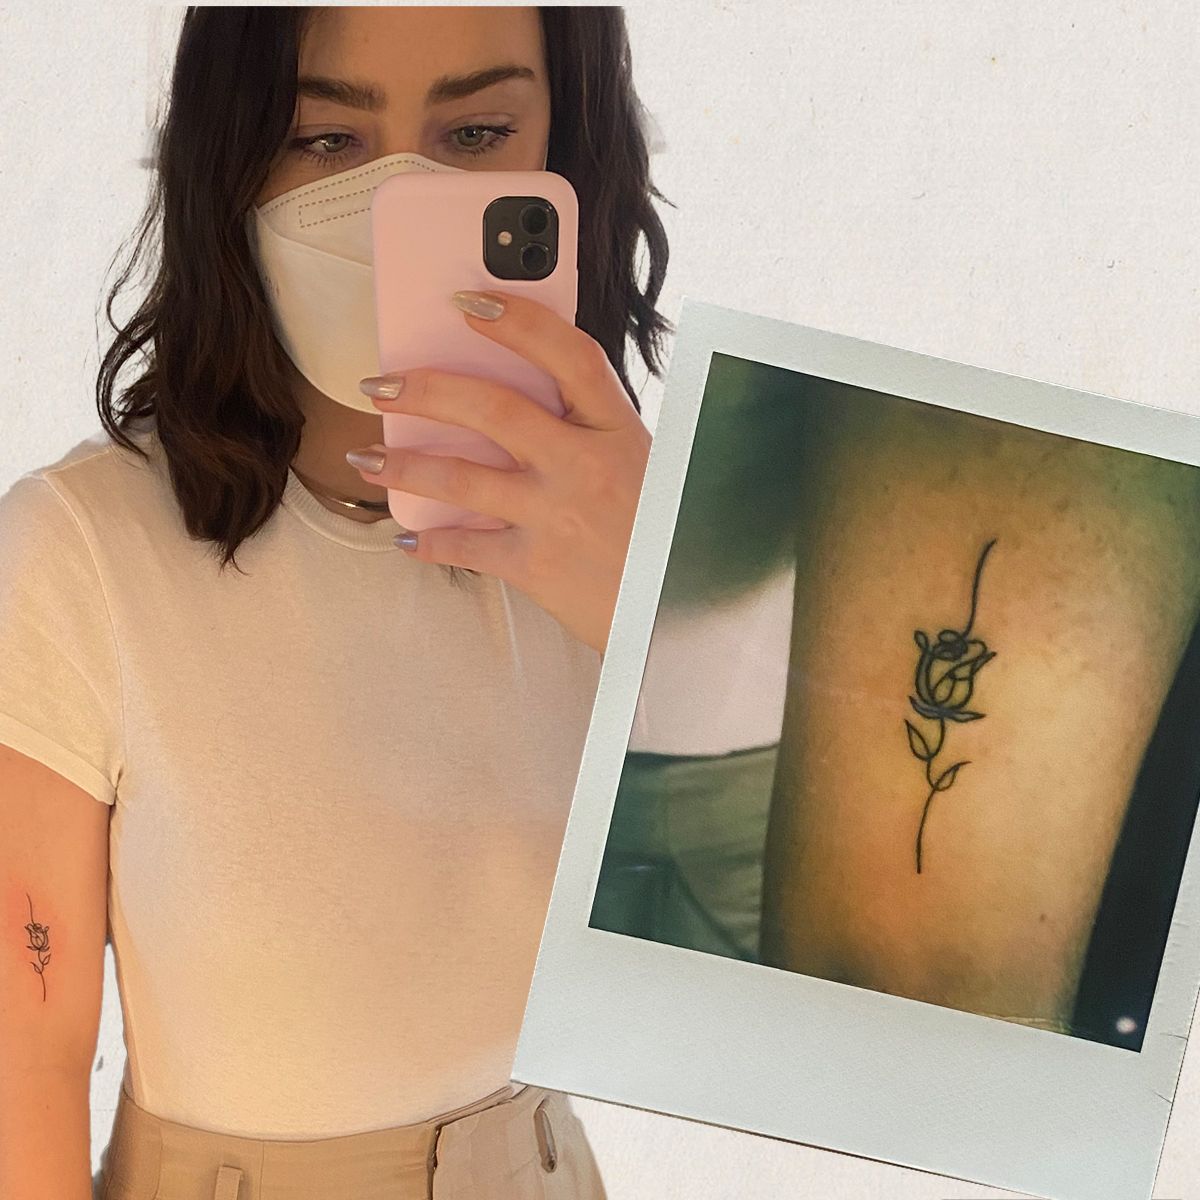 Will Micro Tattoos Fade? Here's What We Know